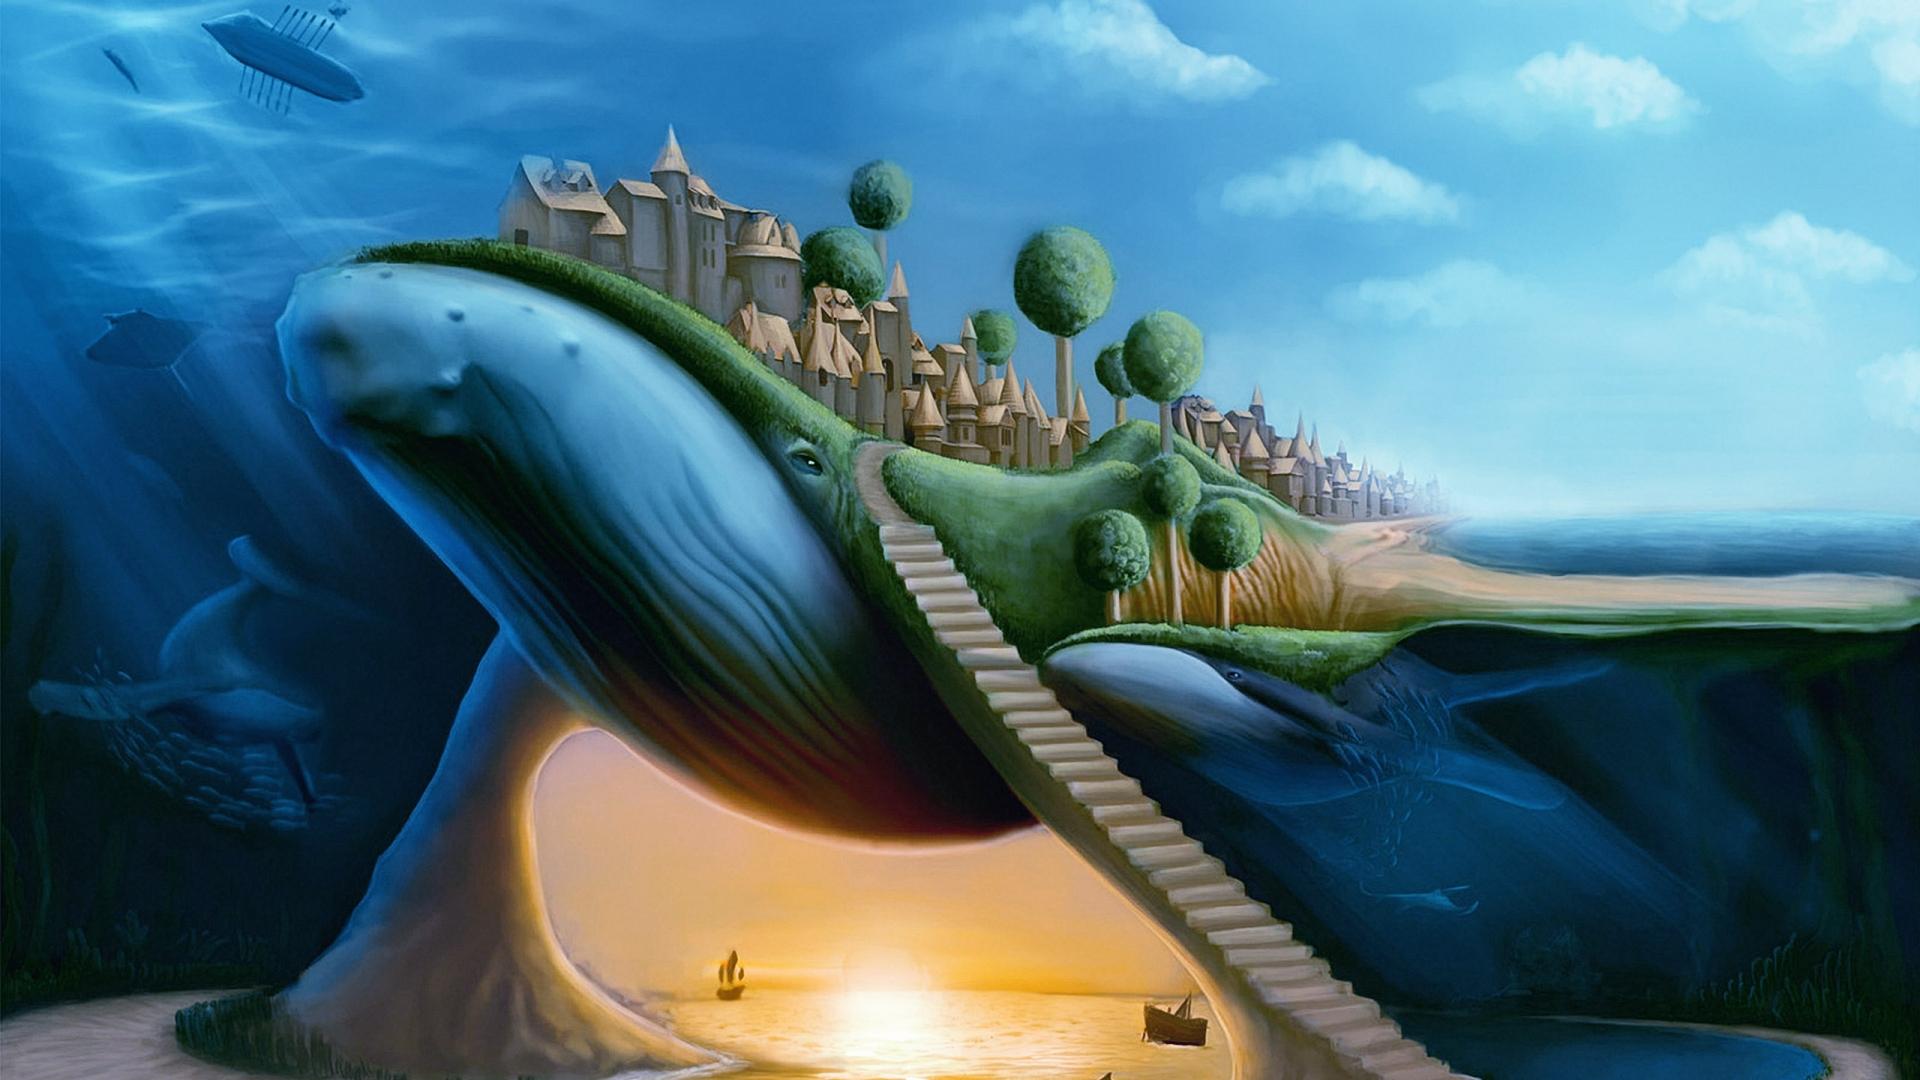 animals, Whales, Surreal, Dream, Fantasy, Whale, Cities, Travel